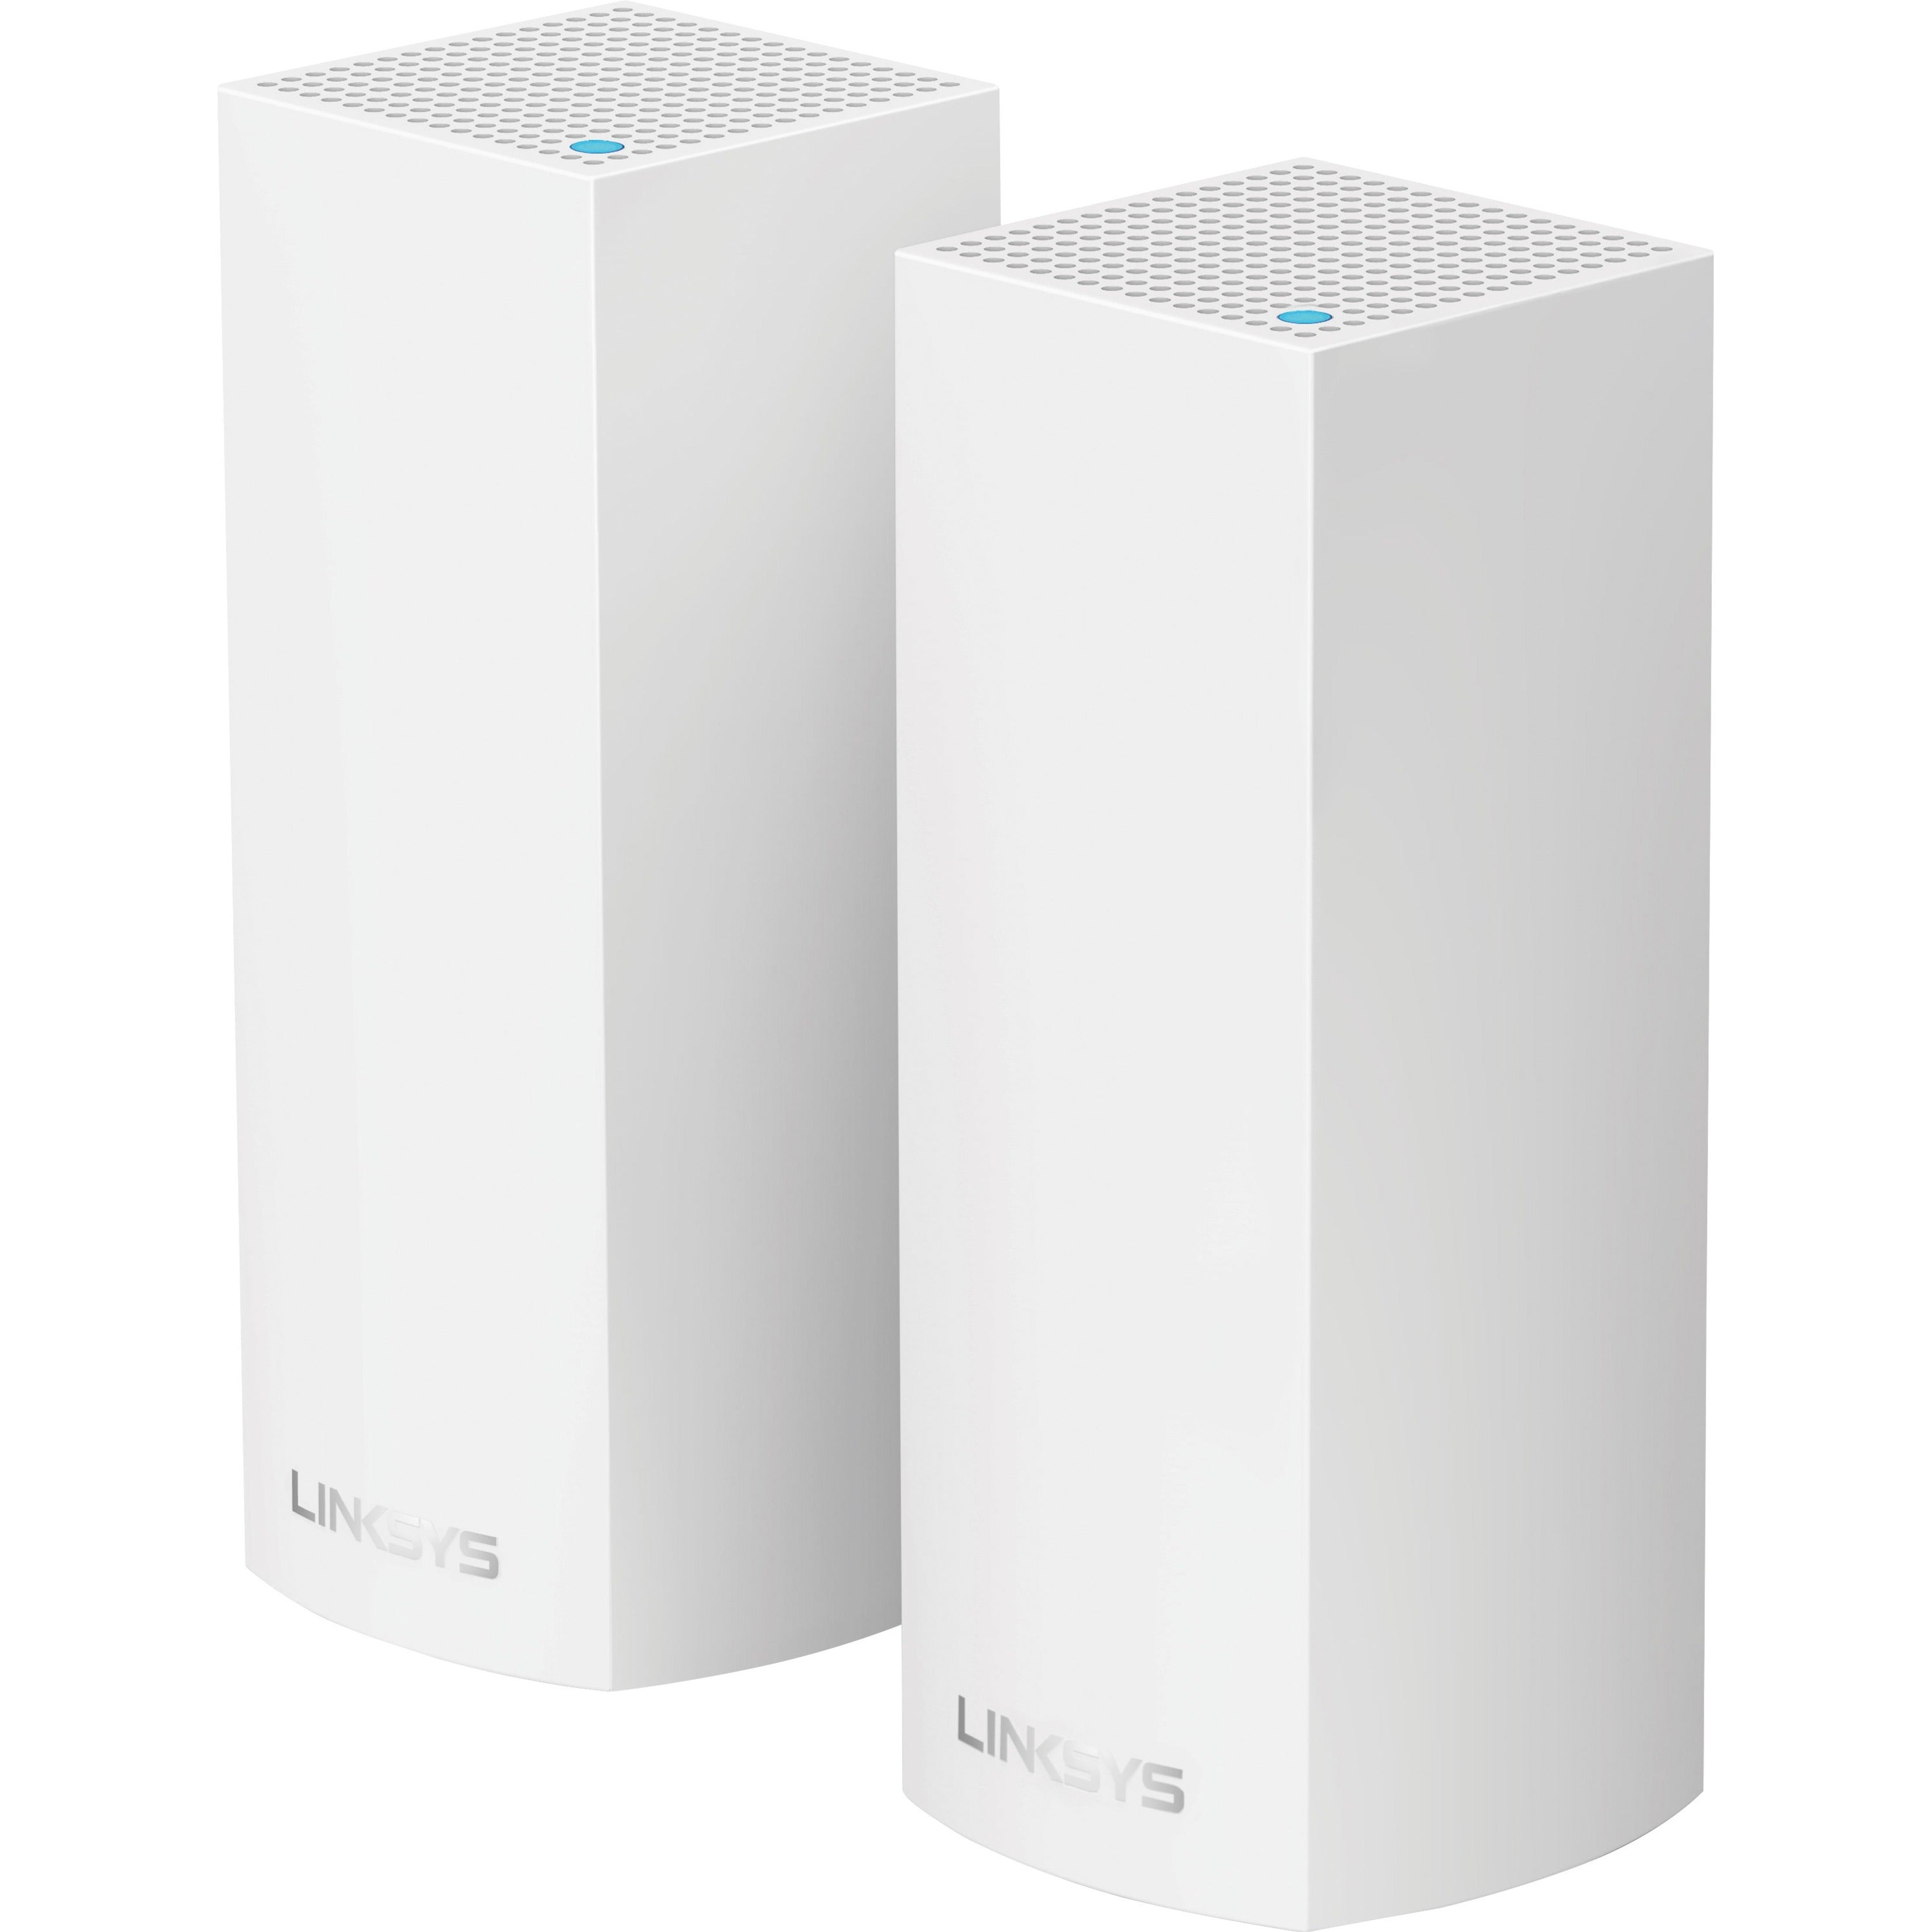 Linksys WHW0302 Velop Wi-Fi 5 Router, Intelligent Mesh Tri-Band Wi-Fi System, Gigabit Ethernet, 275 MB/s